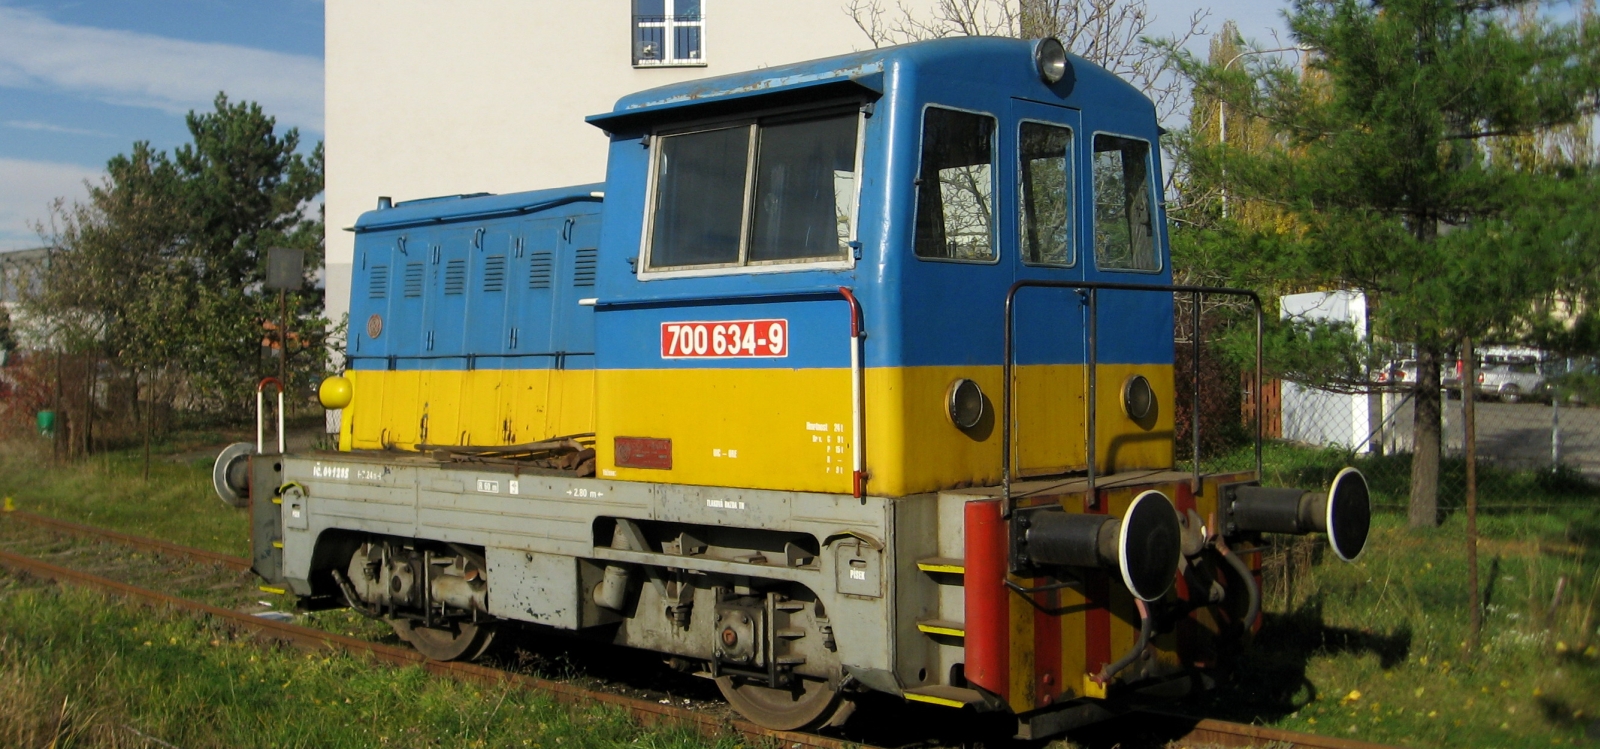 Photo of the 700 634-9 still in service